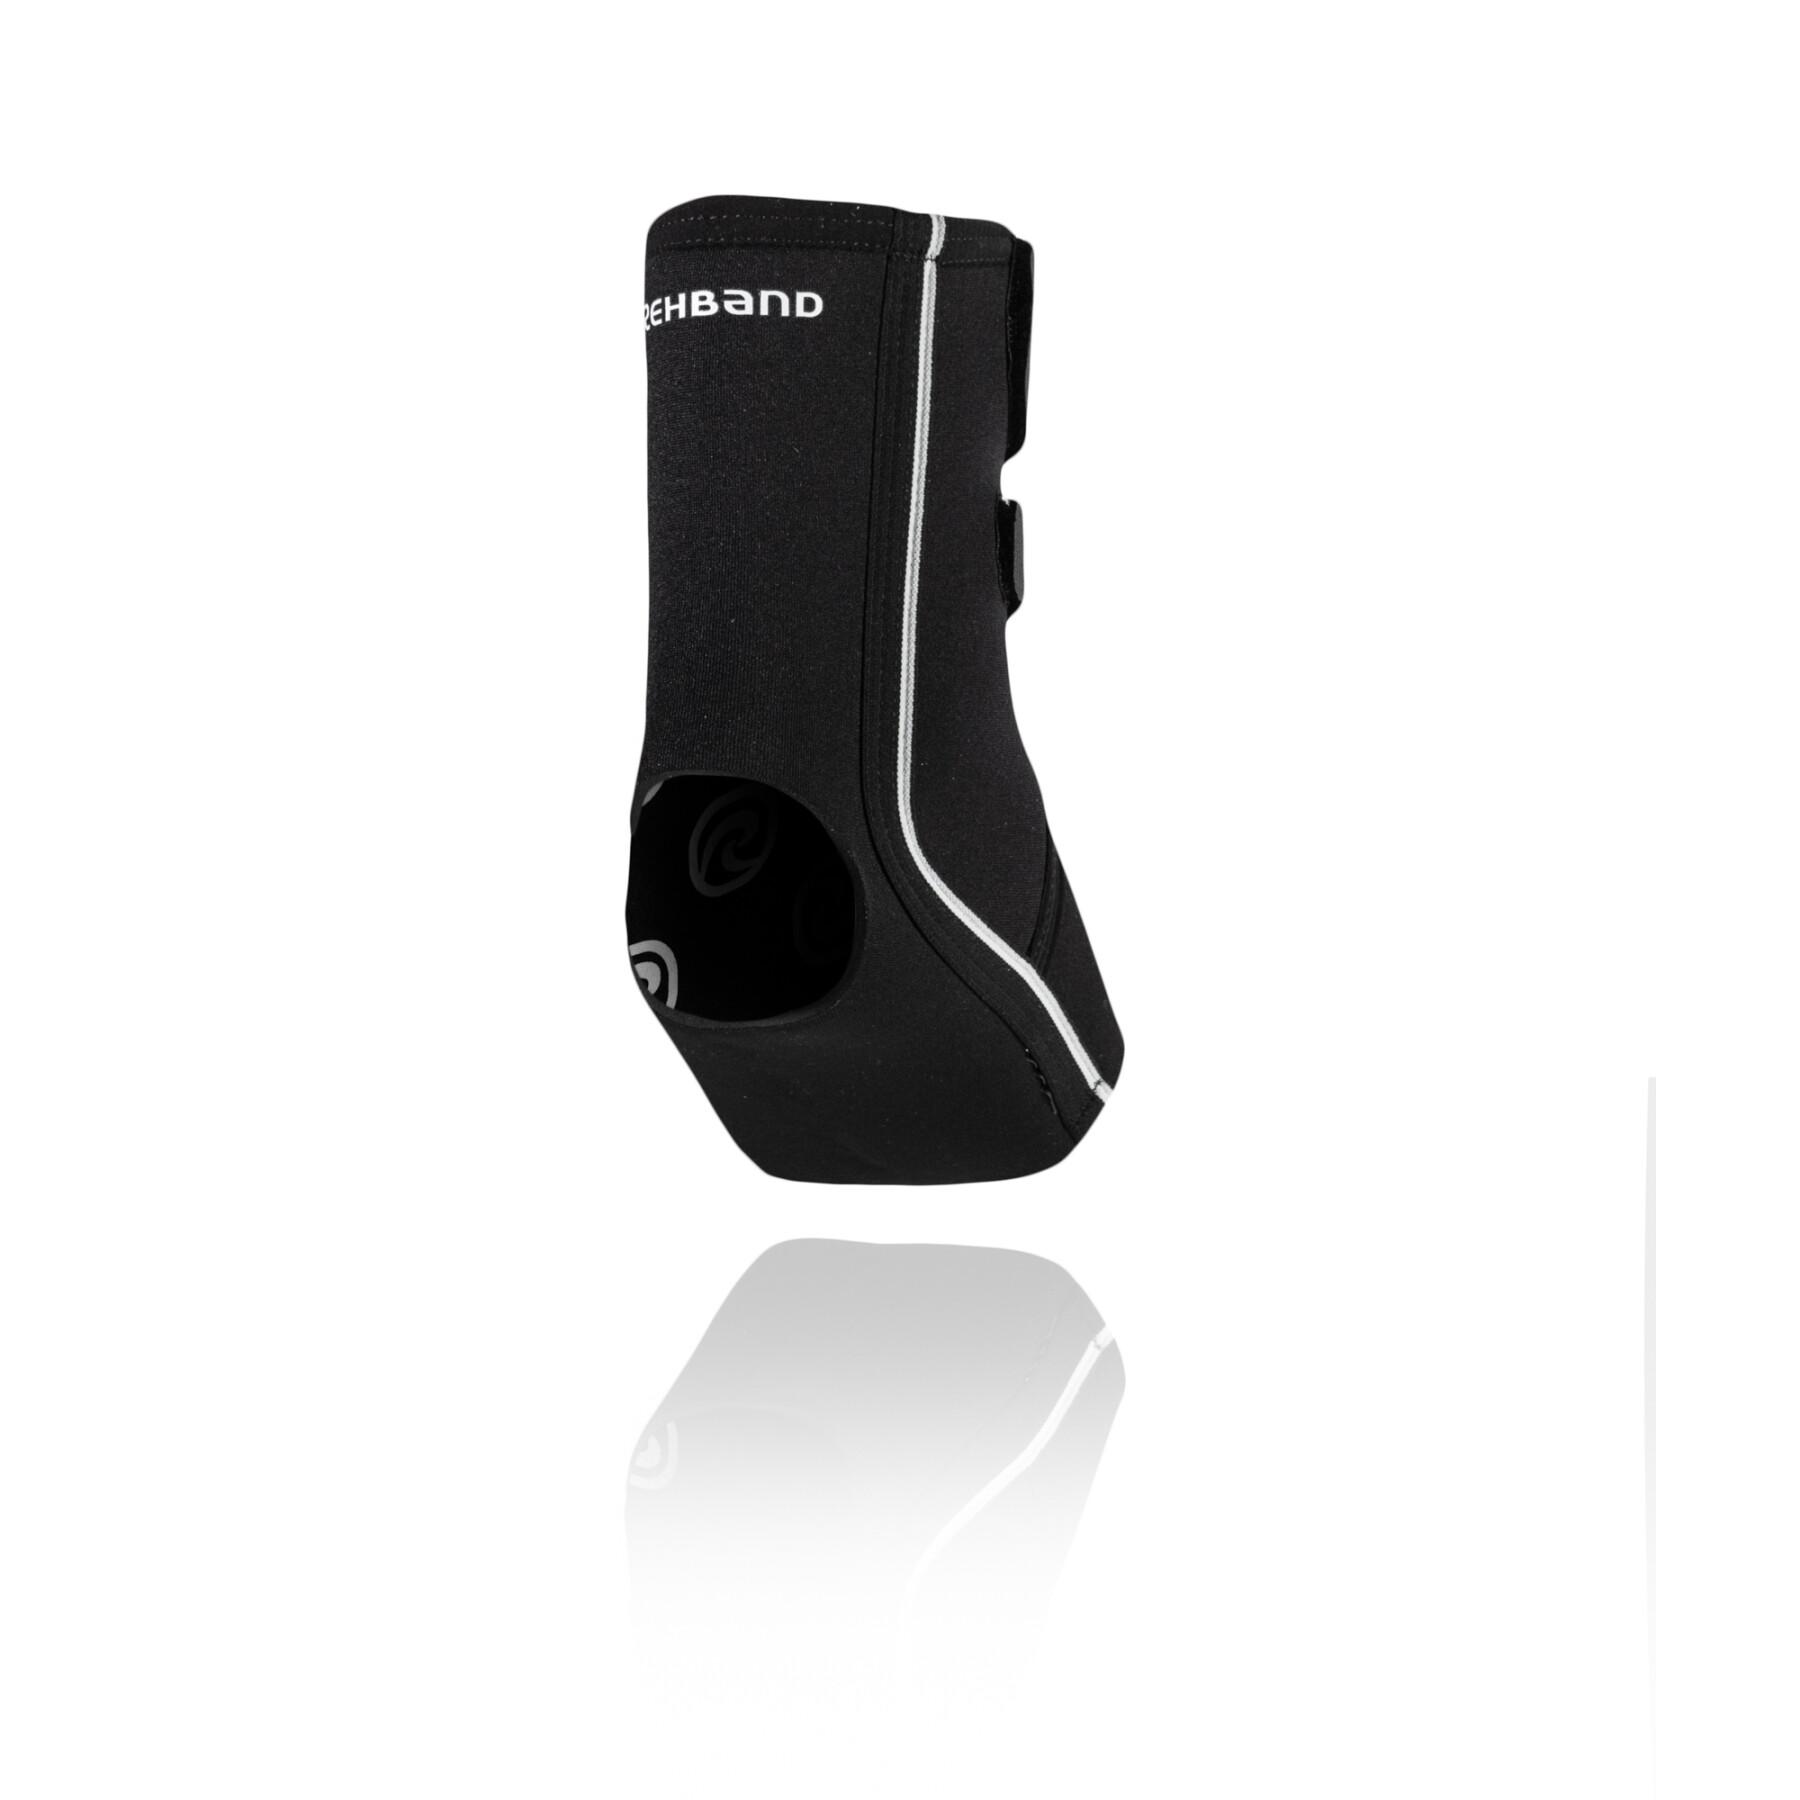 Ankle support Rehband Qd